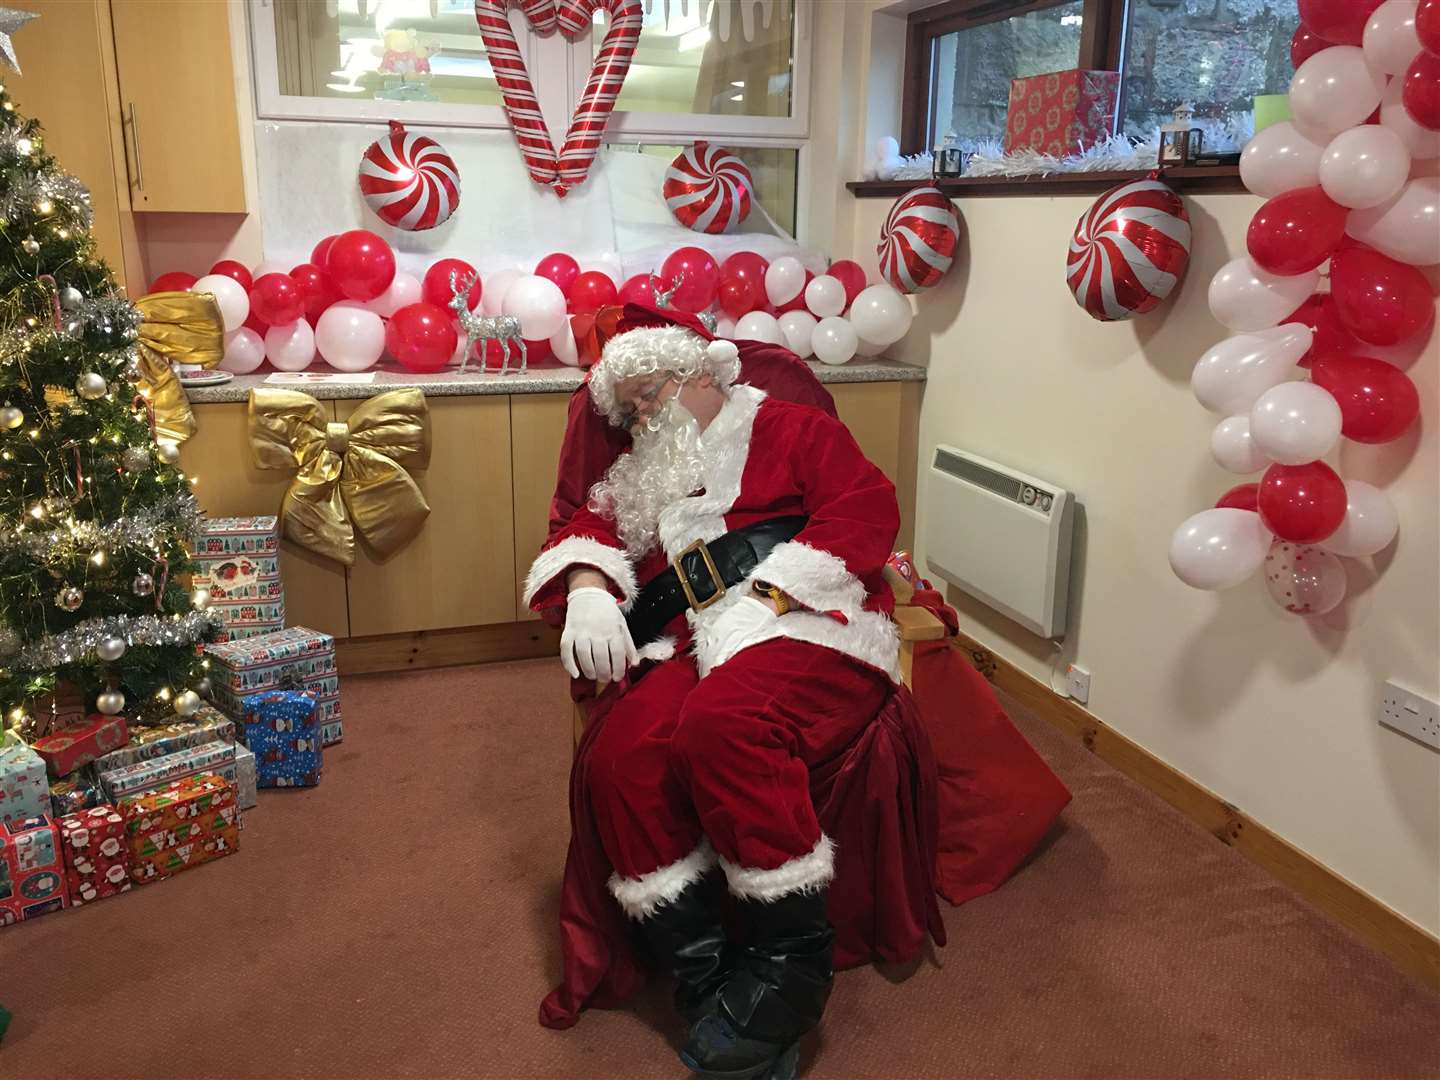 It's a busy time of year for Santa who had to take a little rest after spending all afternoon in his grotto talking to lots of children at Lairg Winterfest.